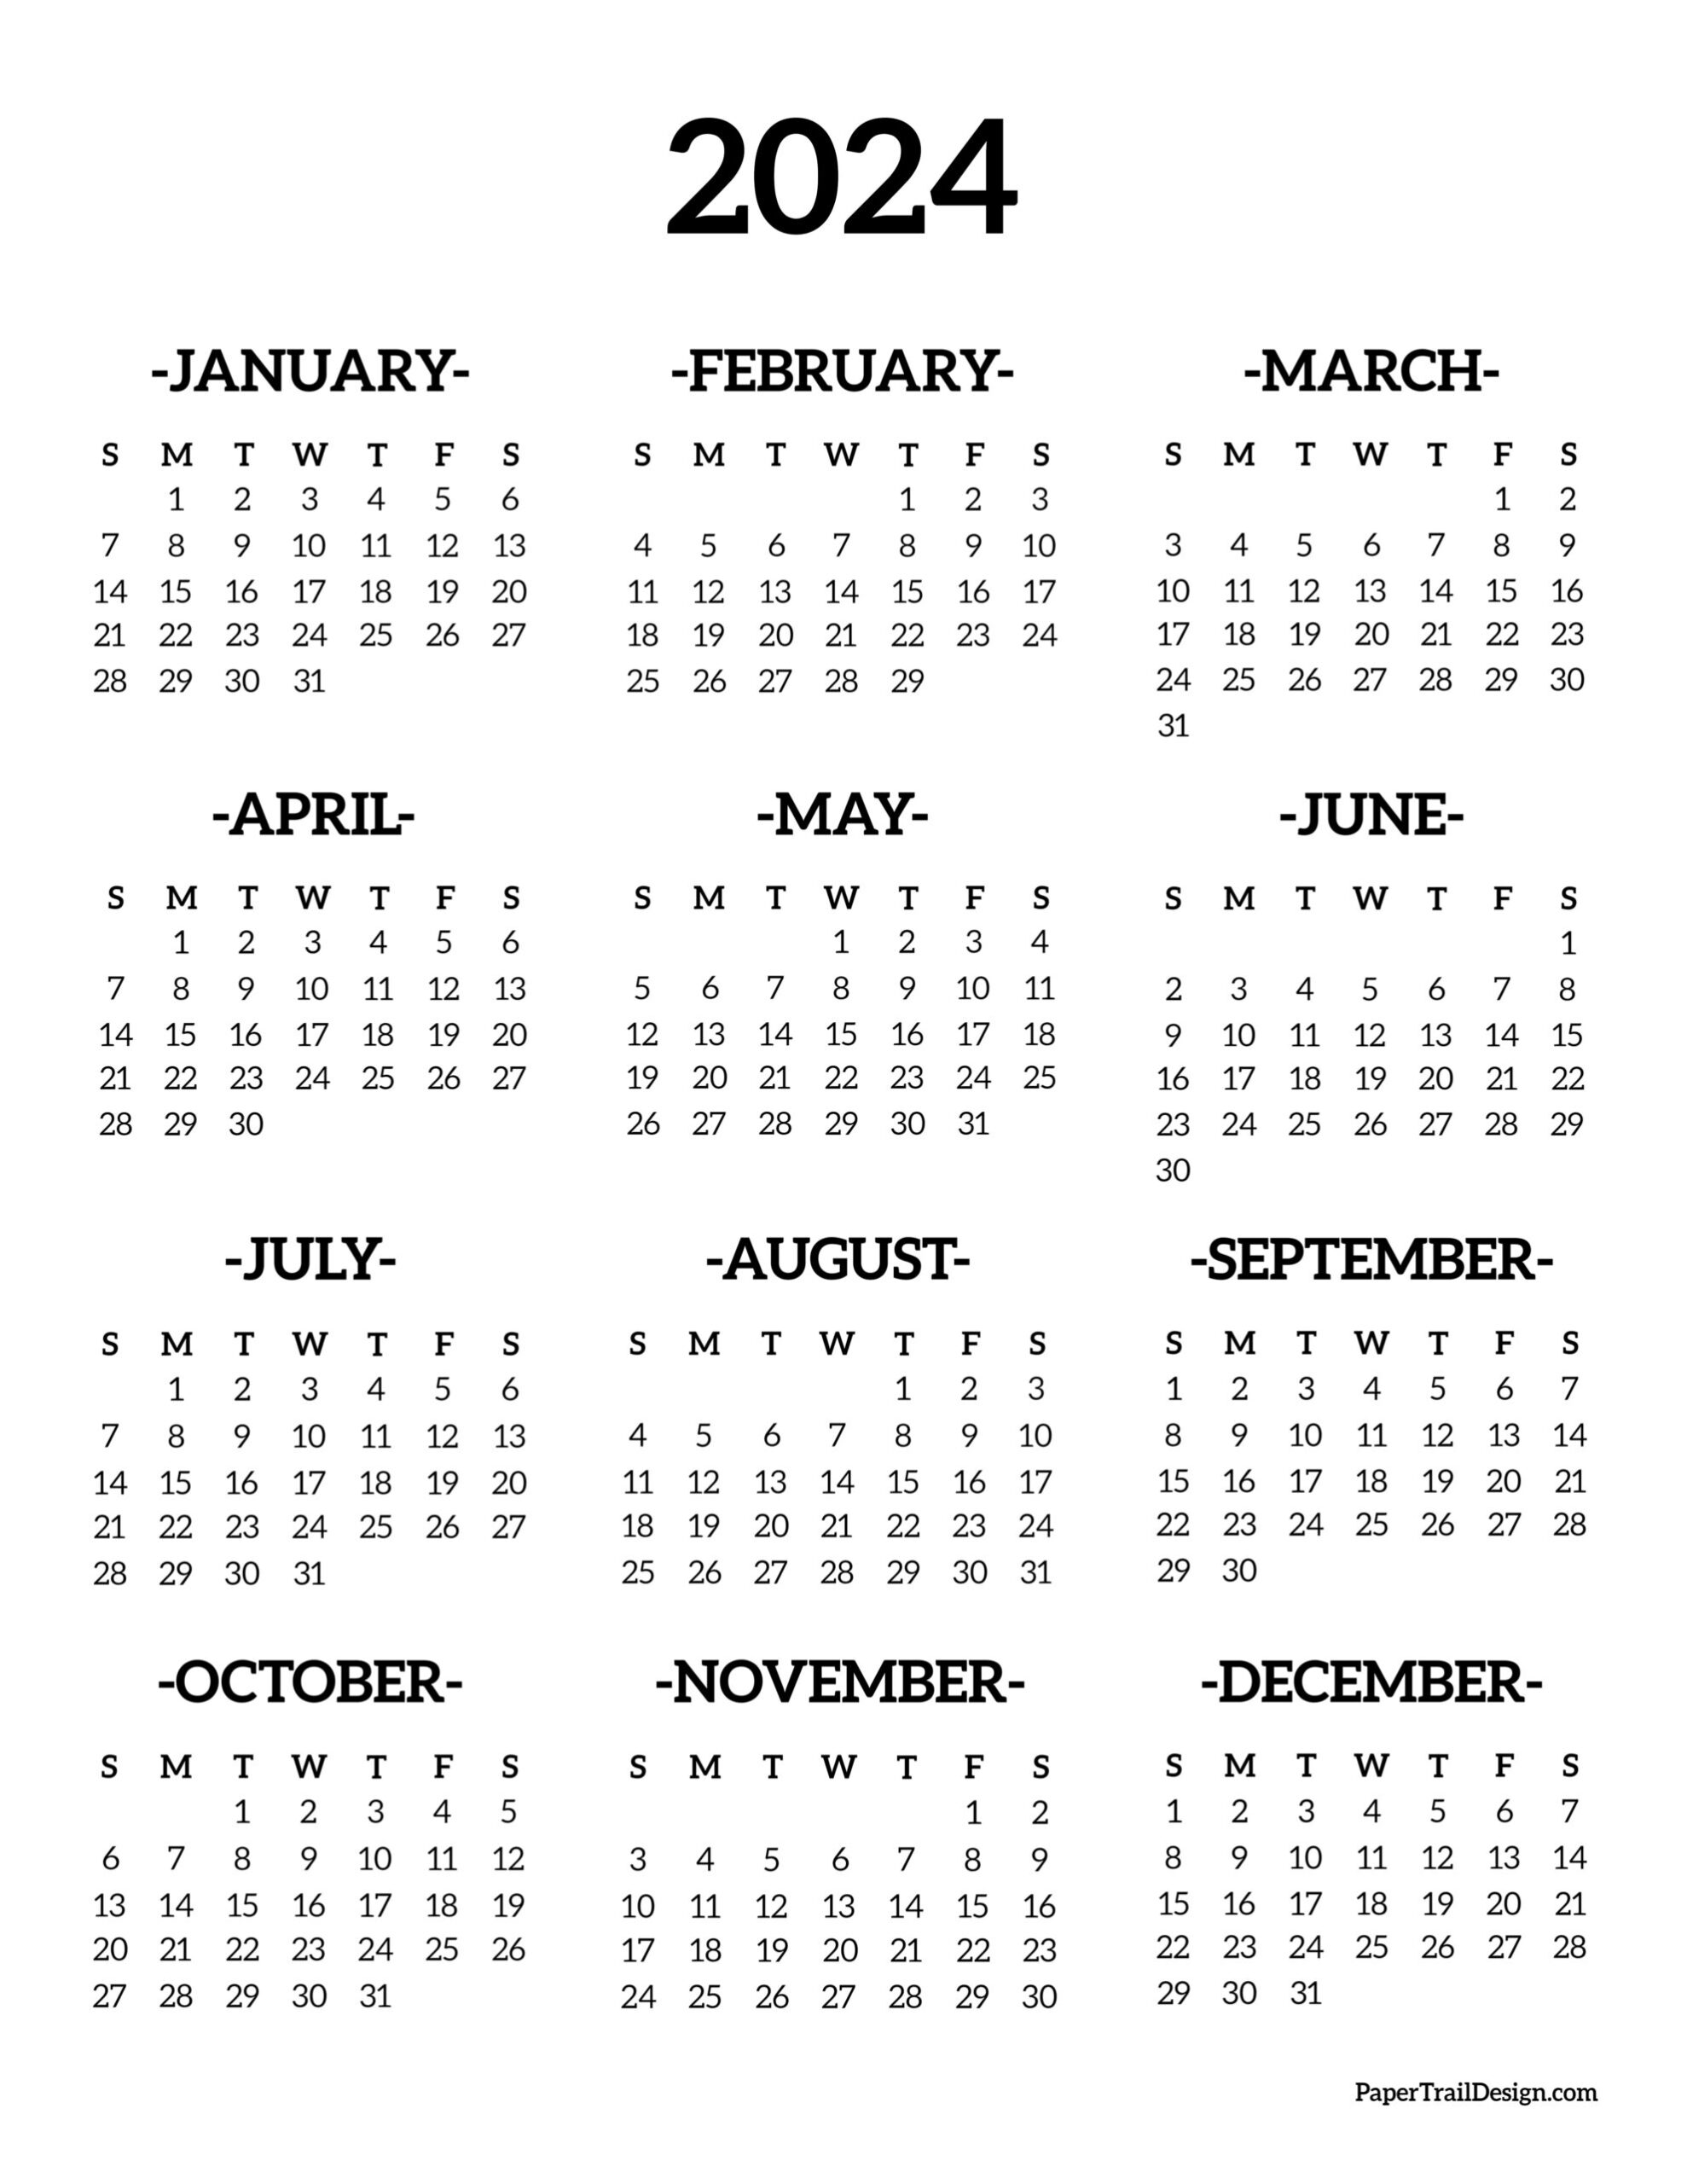 Calendar 2024 Printable One Page - Paper Trail Design for 2024 Calendar Printable Pages